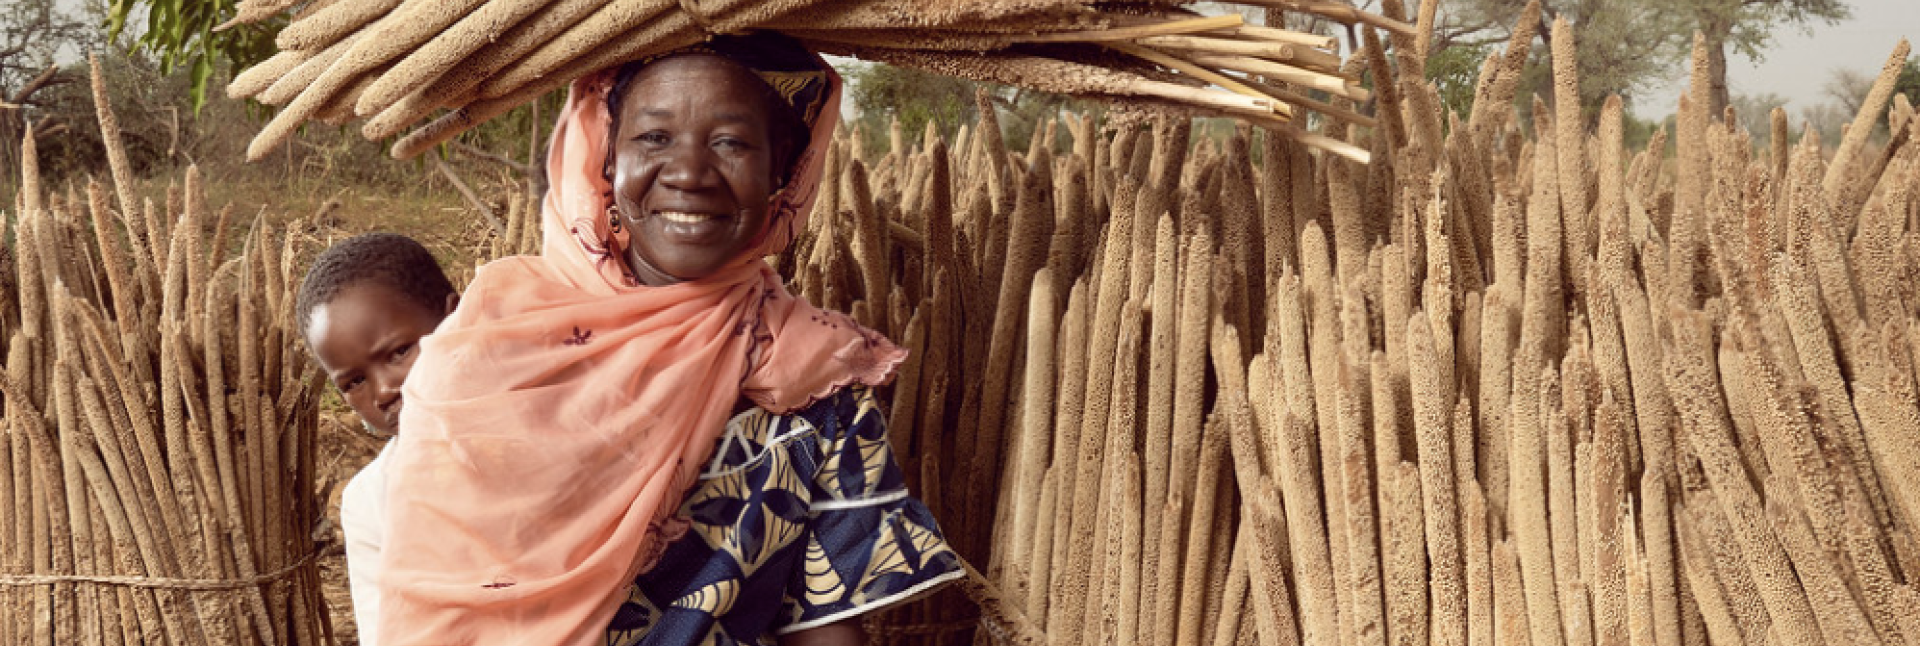 A smiling woman holding a baby in an orange sling sits while balancing wheat on her head. 